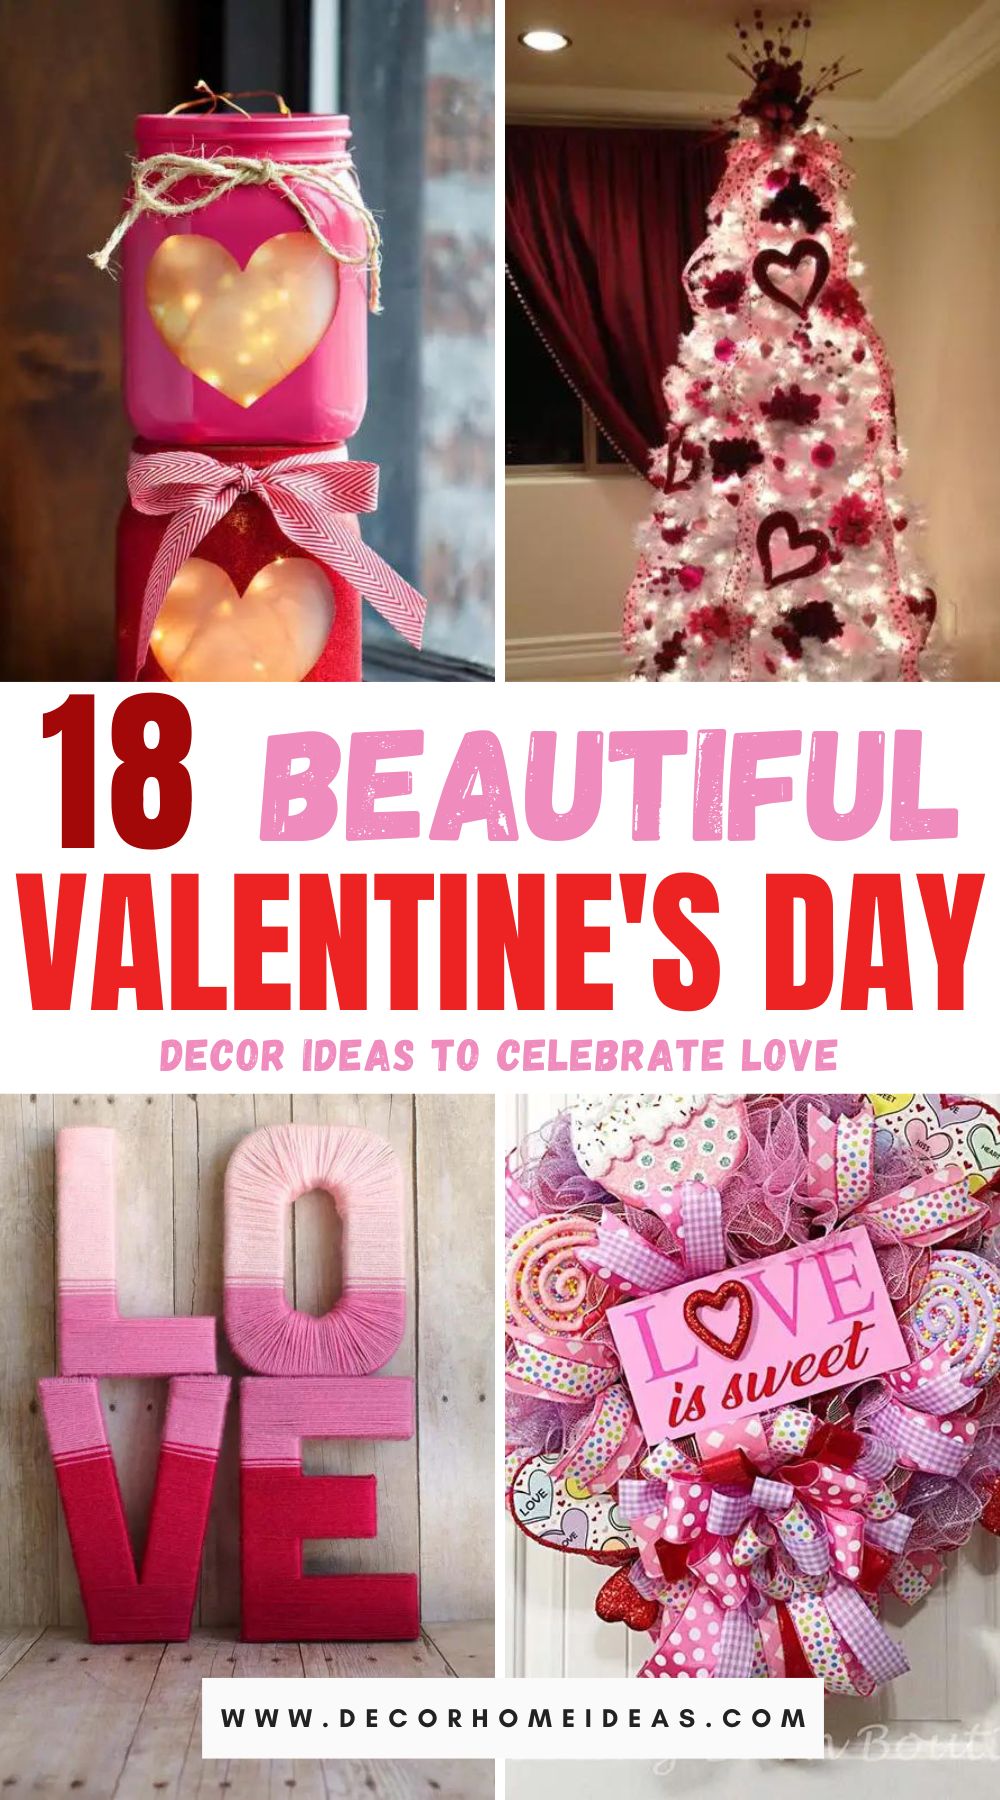 Get ready to celebrate love with these amazing Valentine's day decorations and ideas. Make your home the most beautiful place for the holiday.